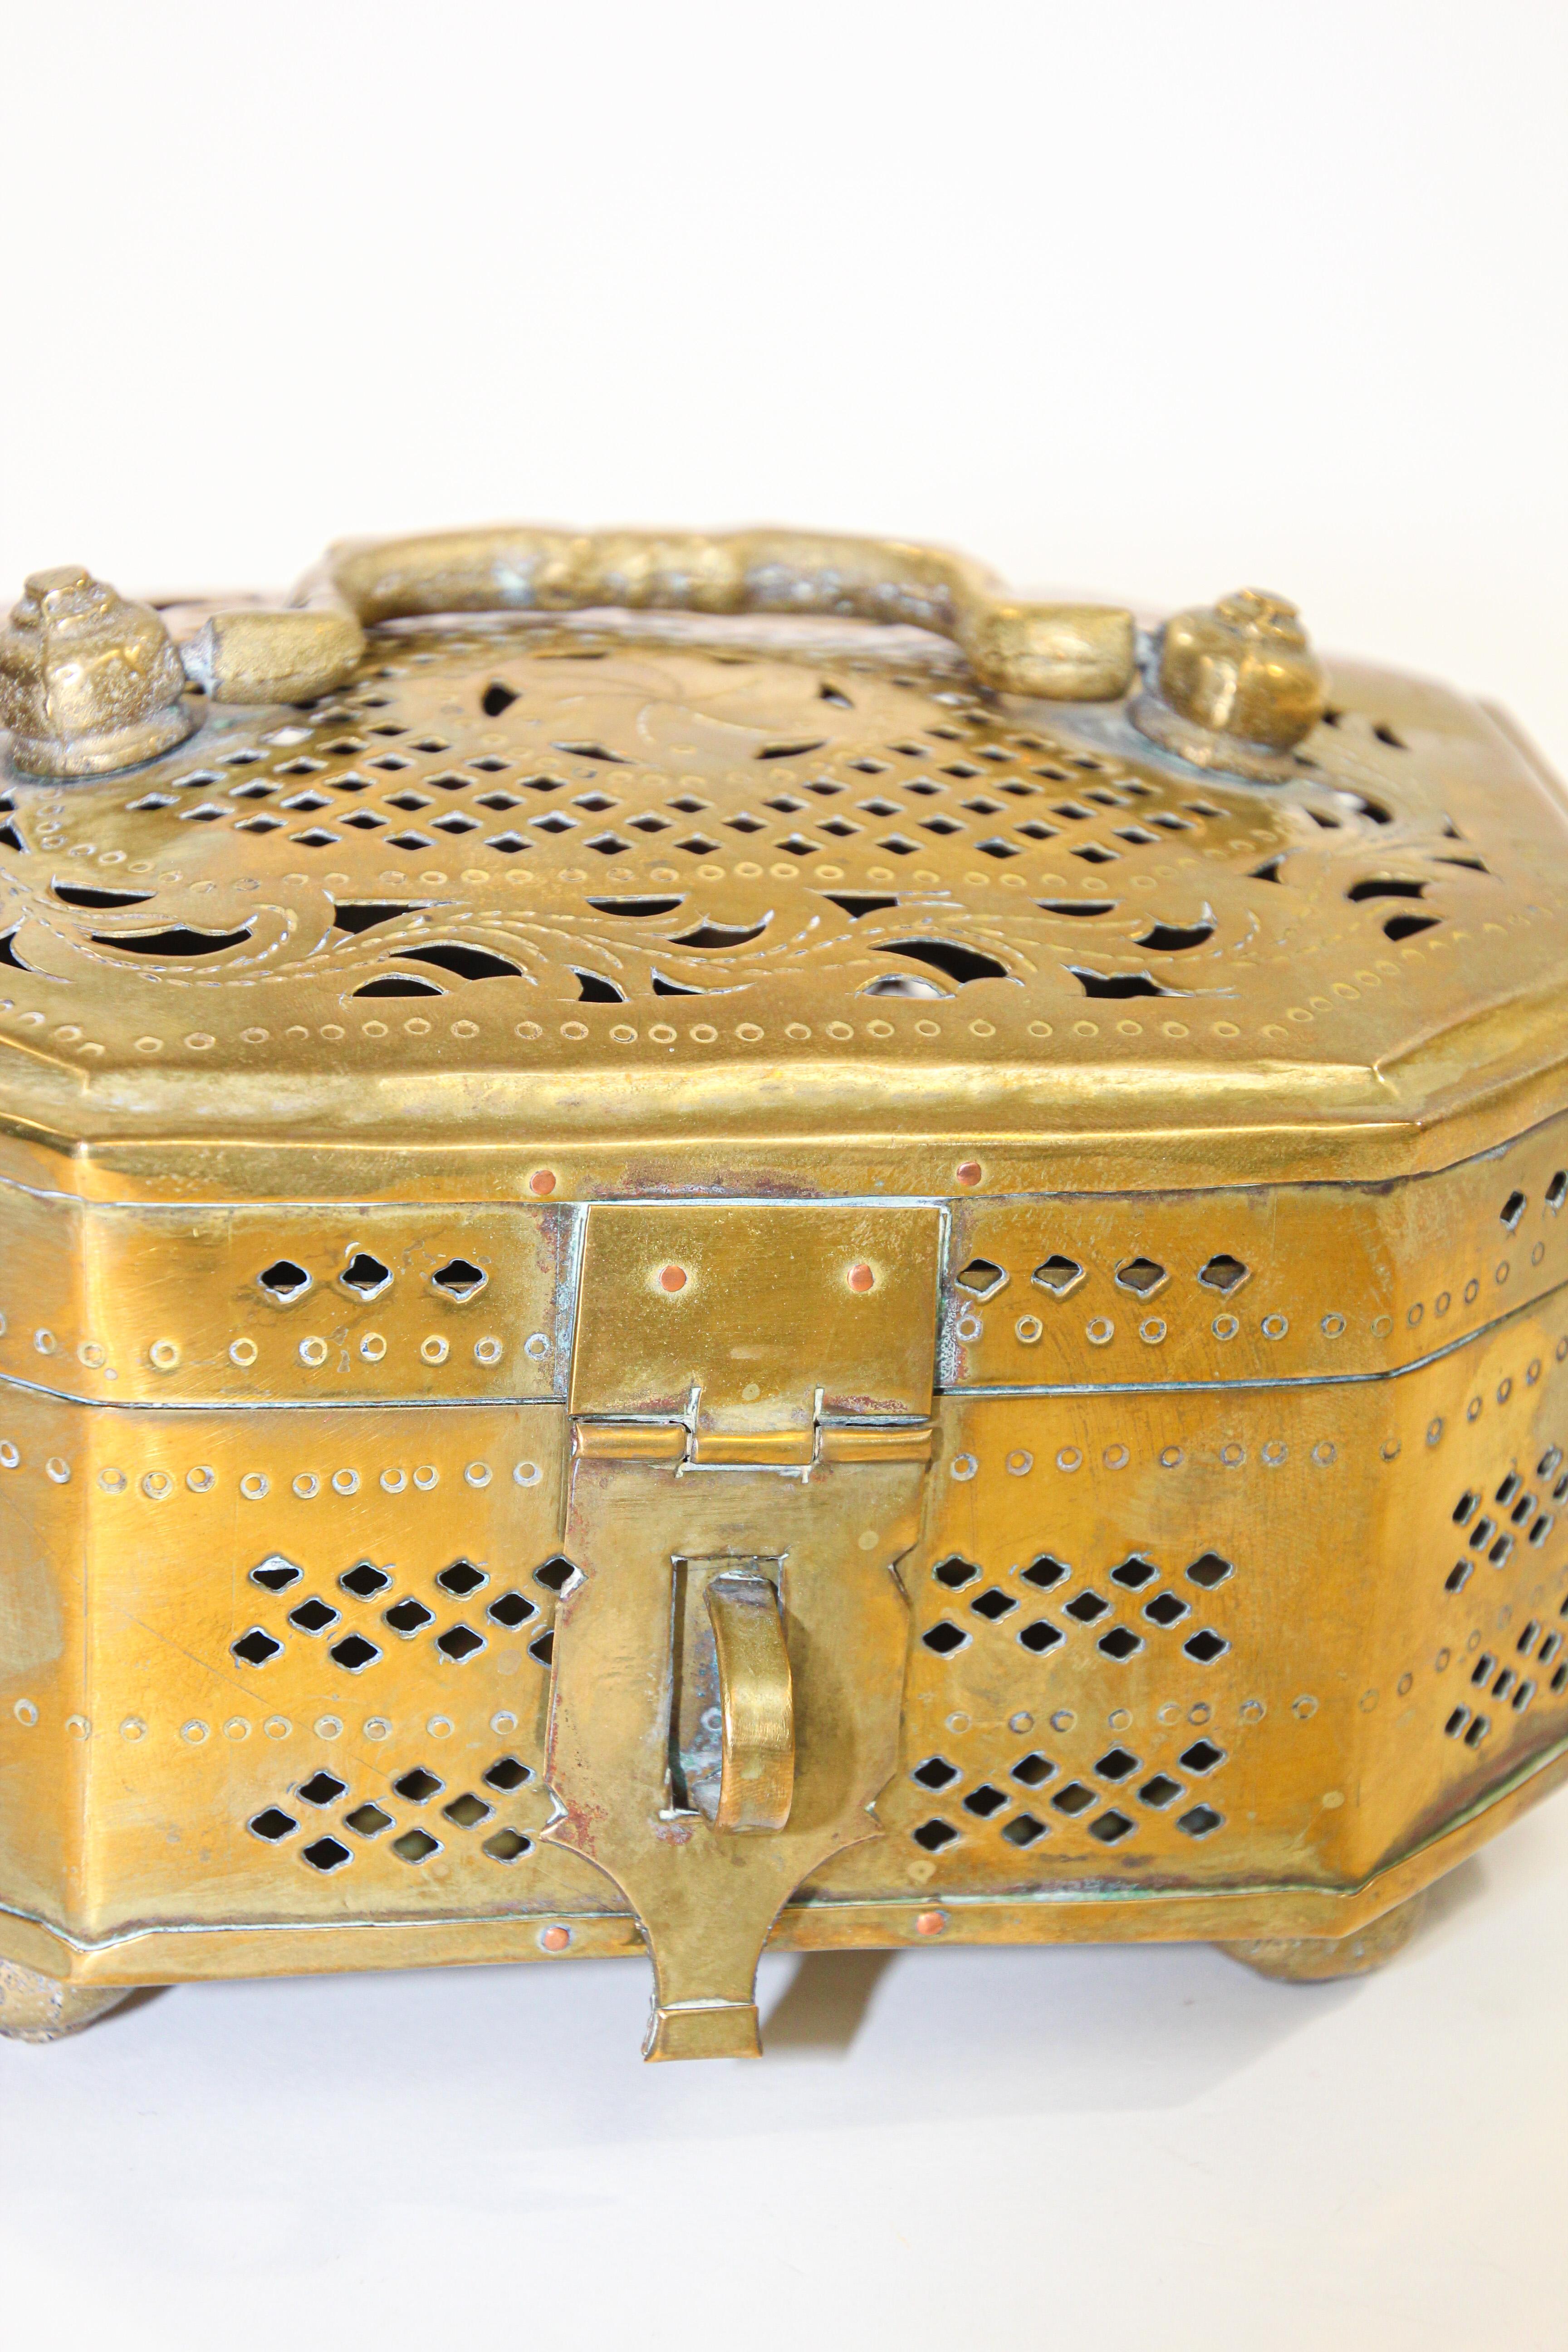 Mughal Indian Polished Brass Pierced Incense Box For Sale 3